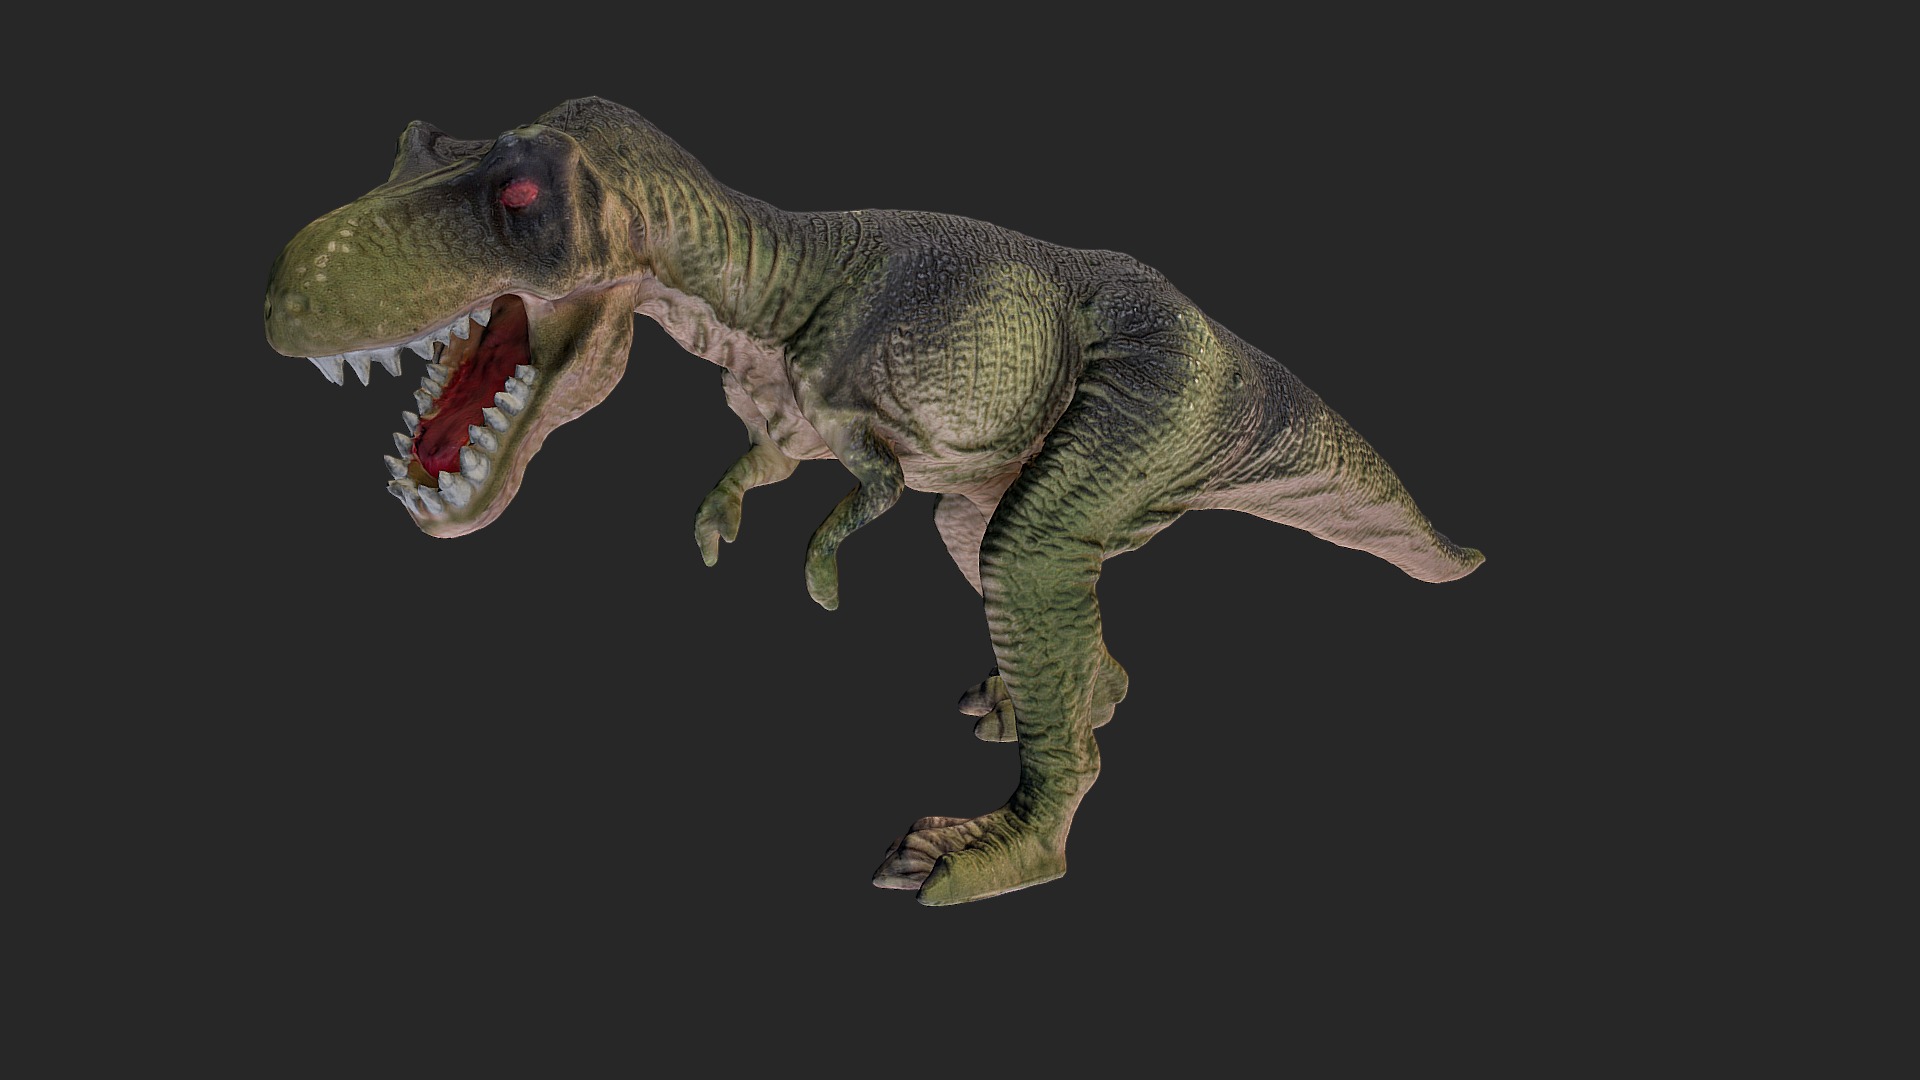 3D model Tyrannosaurus Rex 3D model - This is a 3D model of the Tyrannosaurus Rex 3D model. The 3D model is about a lizard with its mouth open.